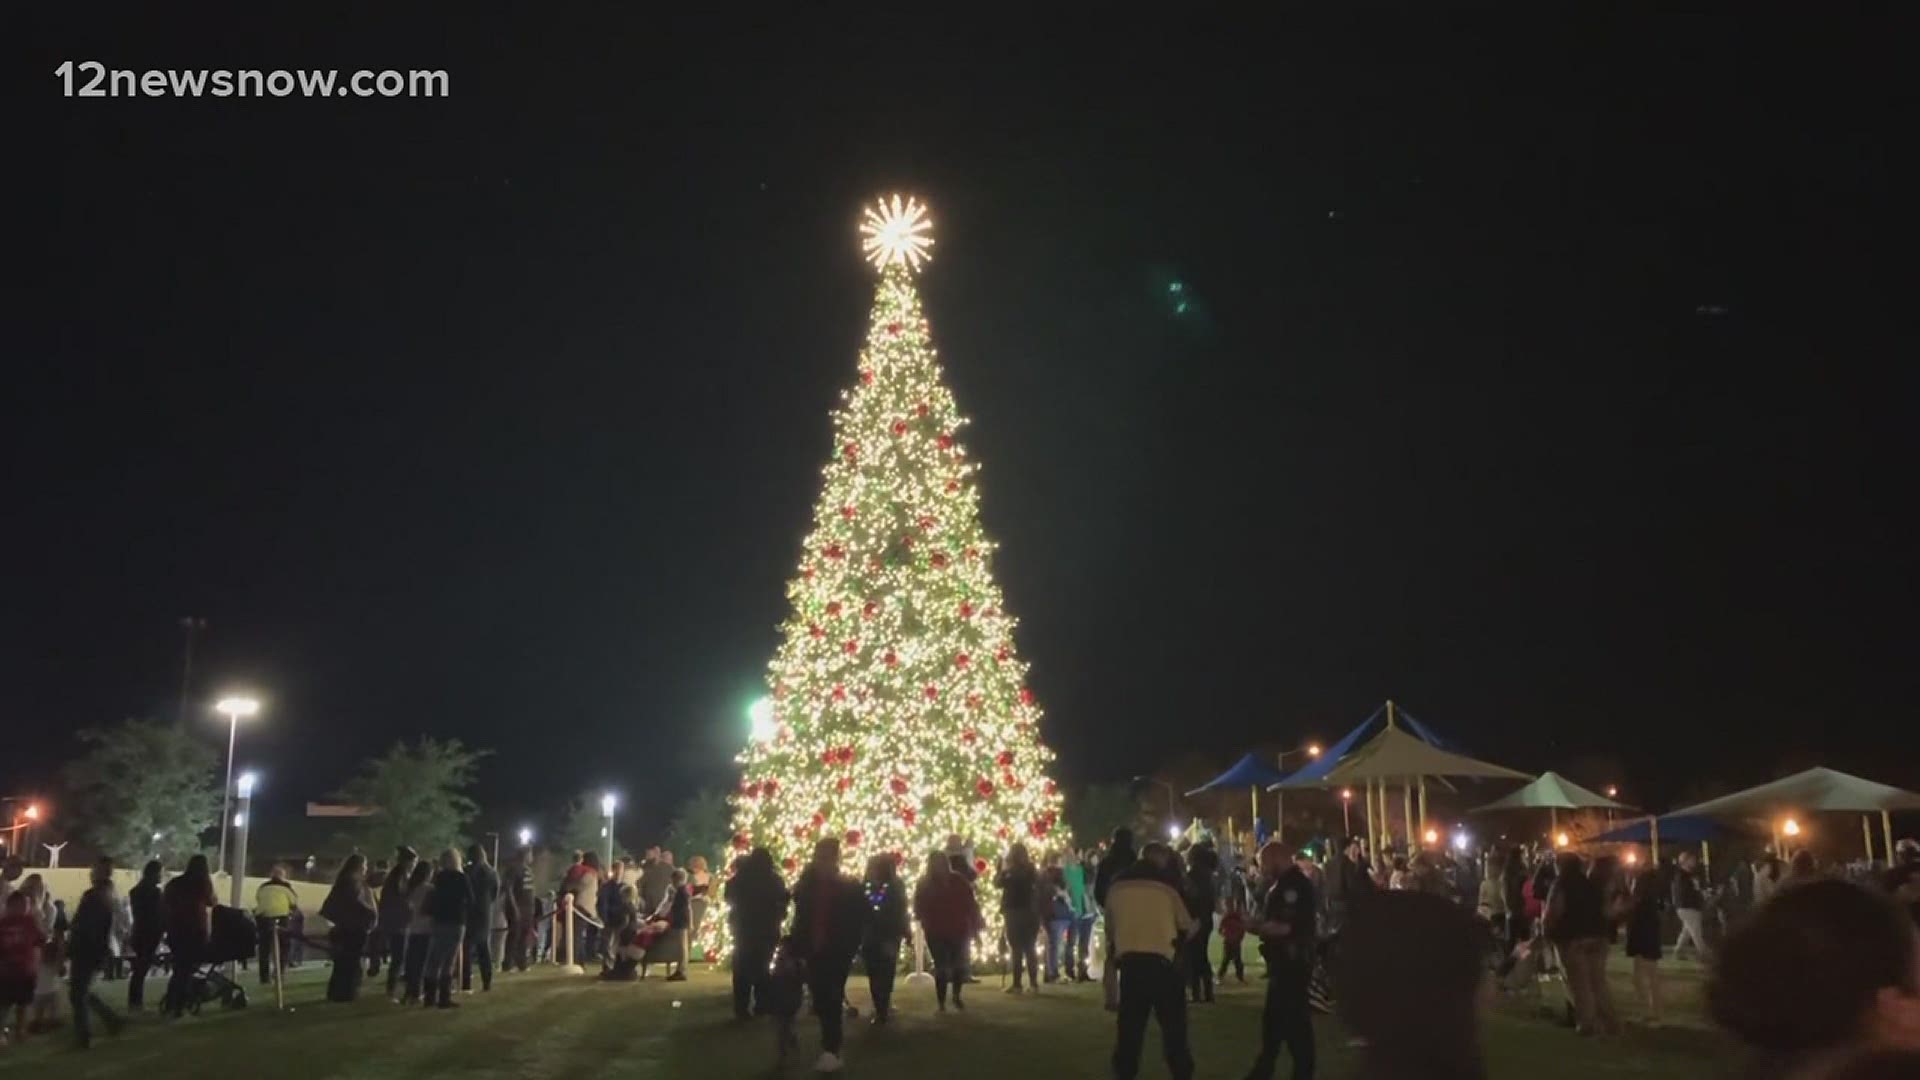 Several Southeast Texas Christmas events are still happening despite a recent spike in COVID-19 cases. Mask and social distancing are encouraged.